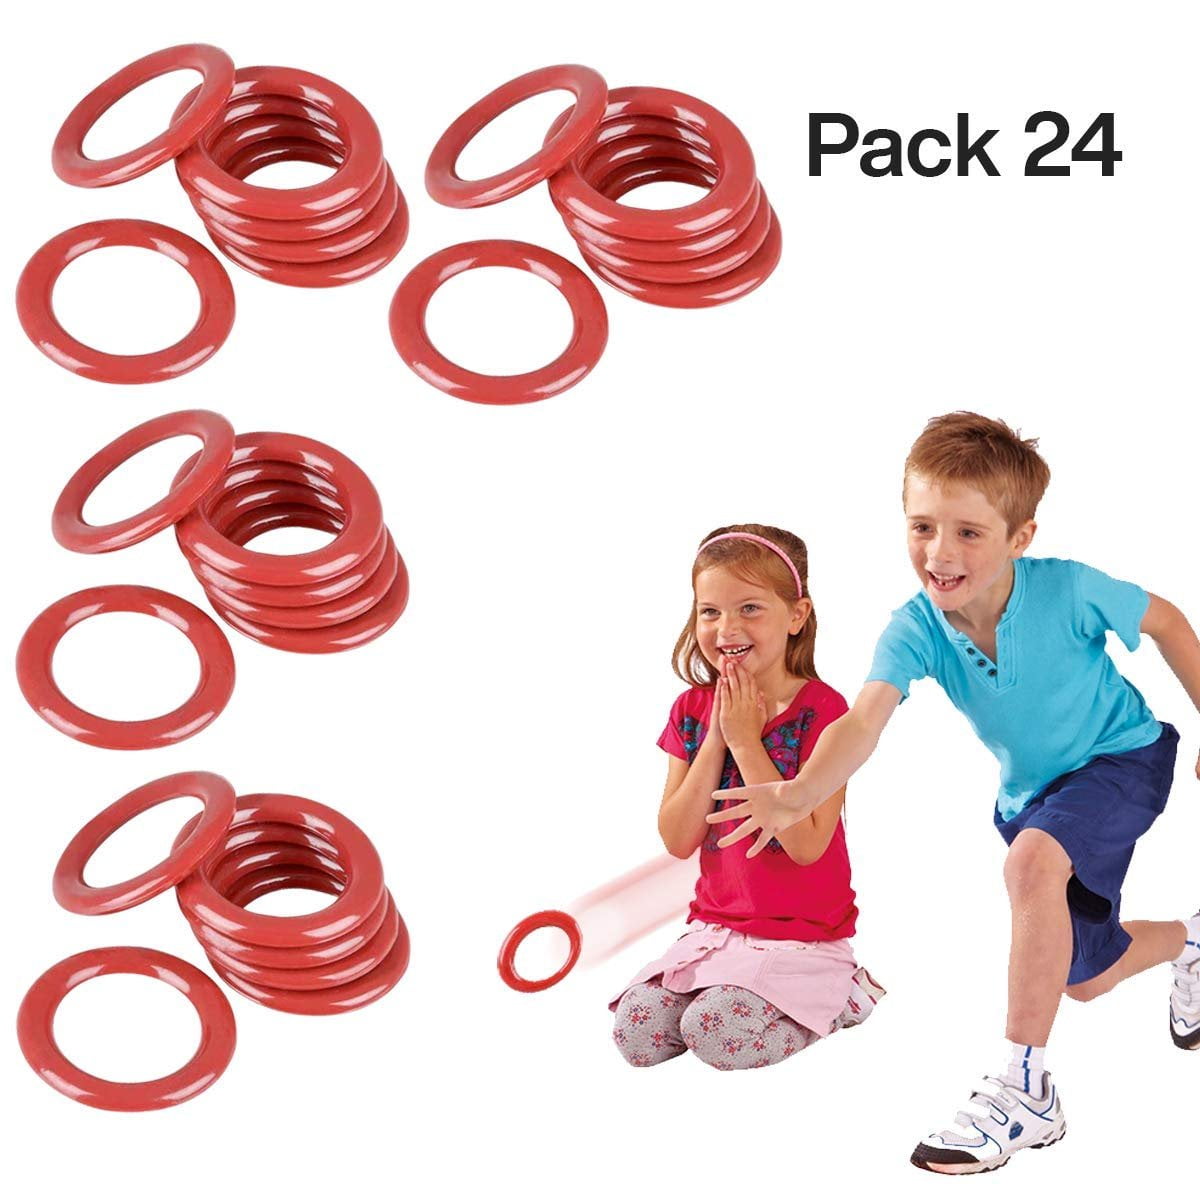 Ring Toss Game 2.5 Hard Plastic Durable. Cool Throw a Ring on the Bottle Game Red Carnival Rings 12 Pieces Great Stress Relief Toy 